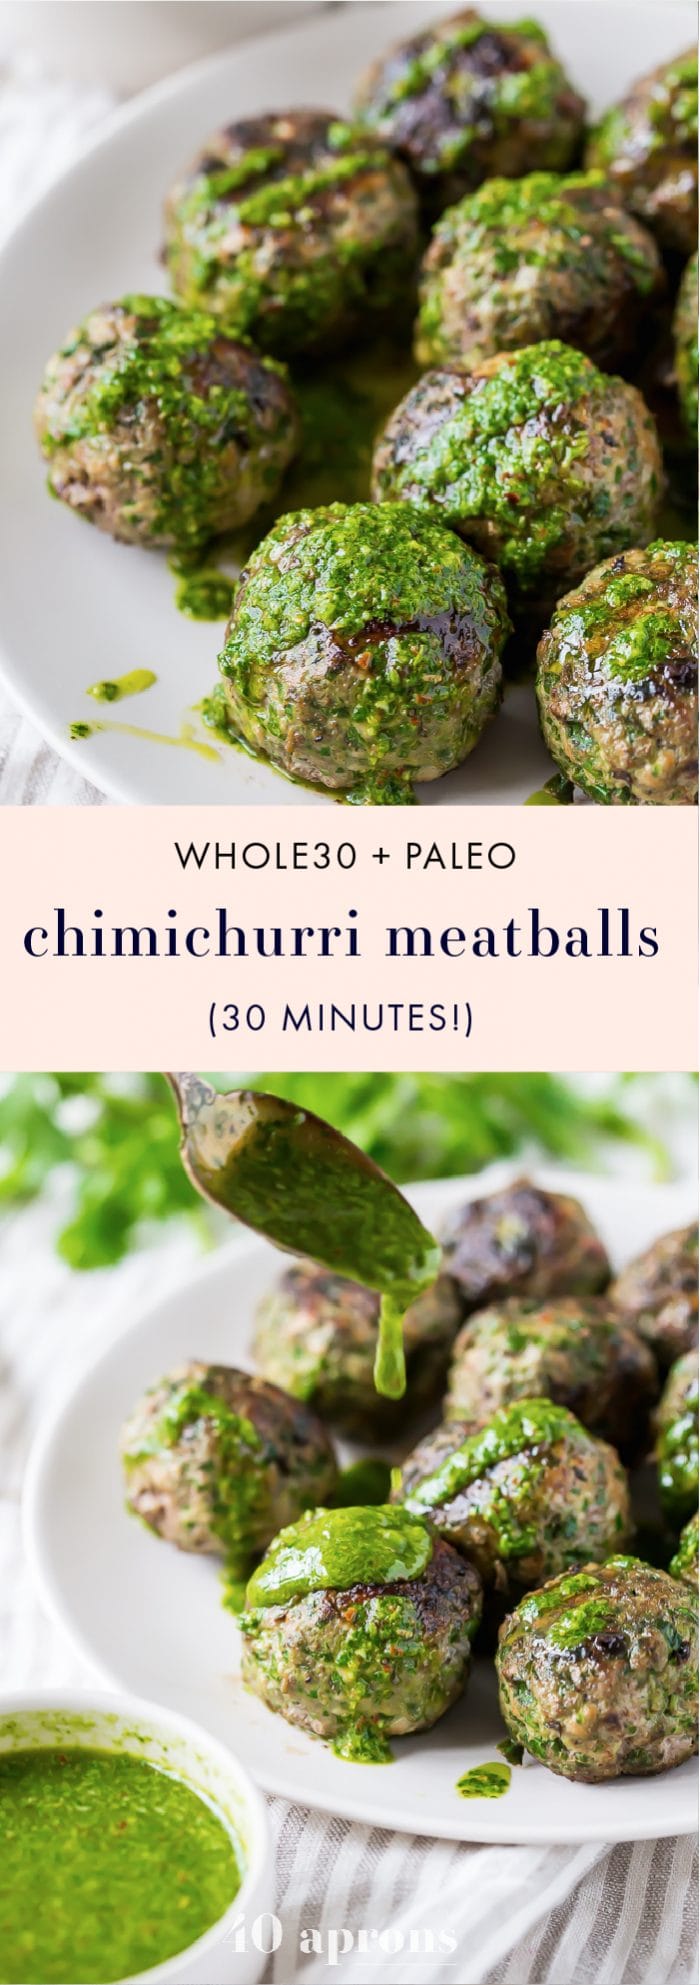 These chimichurri Whole30 meatballs are packed full of flavor and come together easily with the help of a food processor. Ideal for those on a spring or summer Whole30, they're garlicky and tender, thanks to the Swiss chard. A great Whole30 dinner and Whole30 meatballs recipe